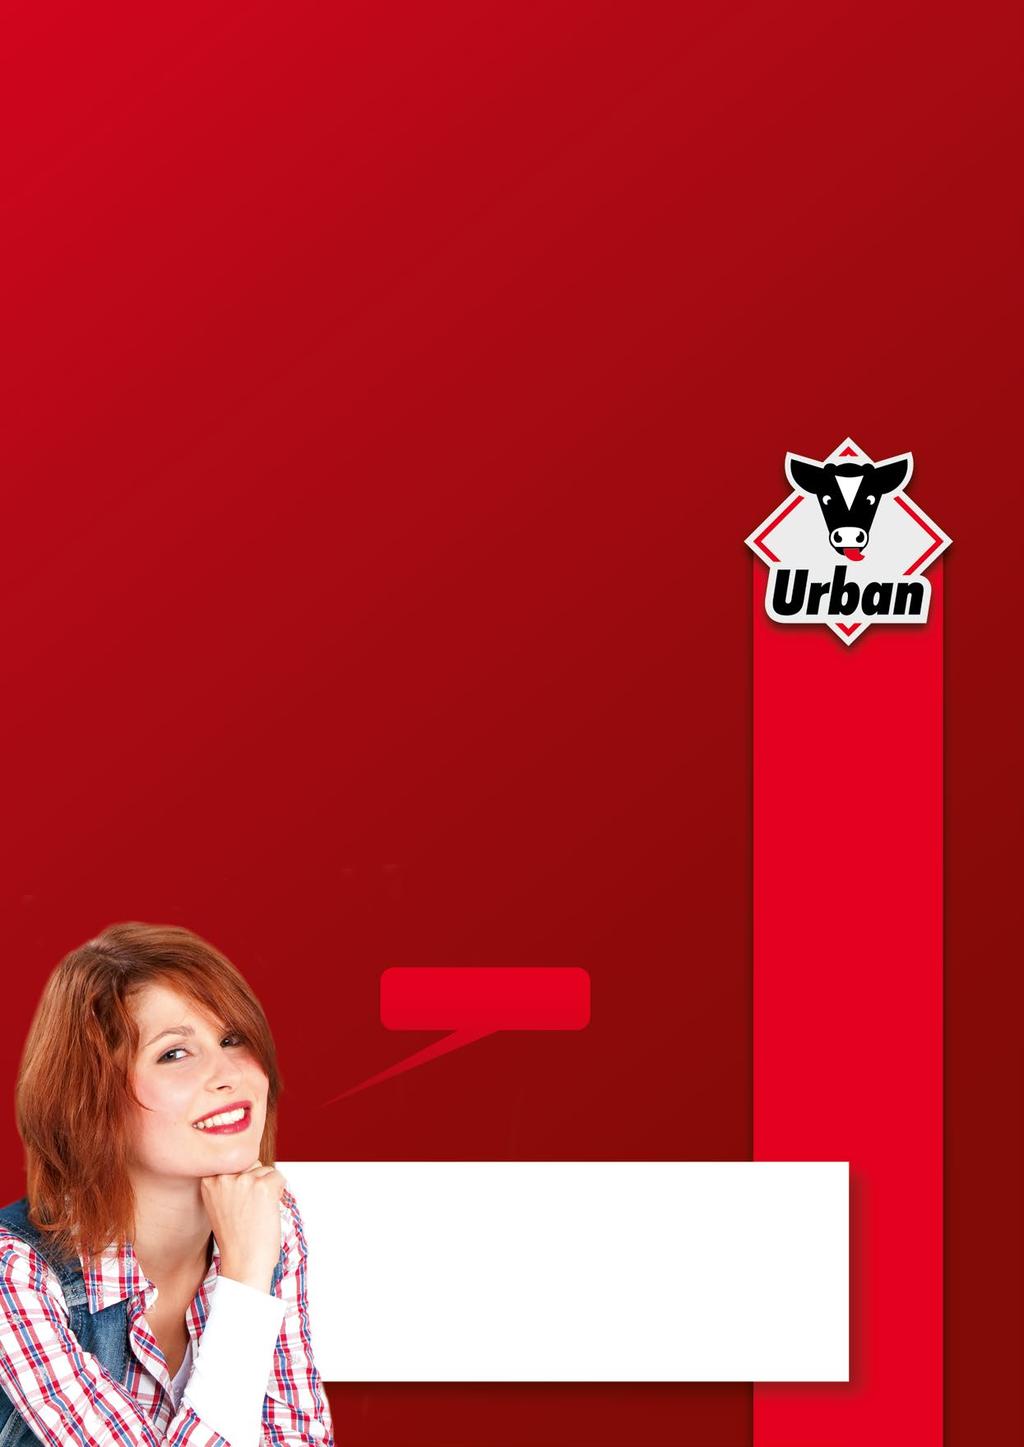 Urban GmbH & Co. KG Phone: +49 (0) 44 84 / 93 80-0 Auf der Striepe 9 D-27798 Wüsting (Germany) Find out more? Simply scan with the QR app of your smartphone! info@urbanonline.de www.urbanonline.de Visit us at: www.